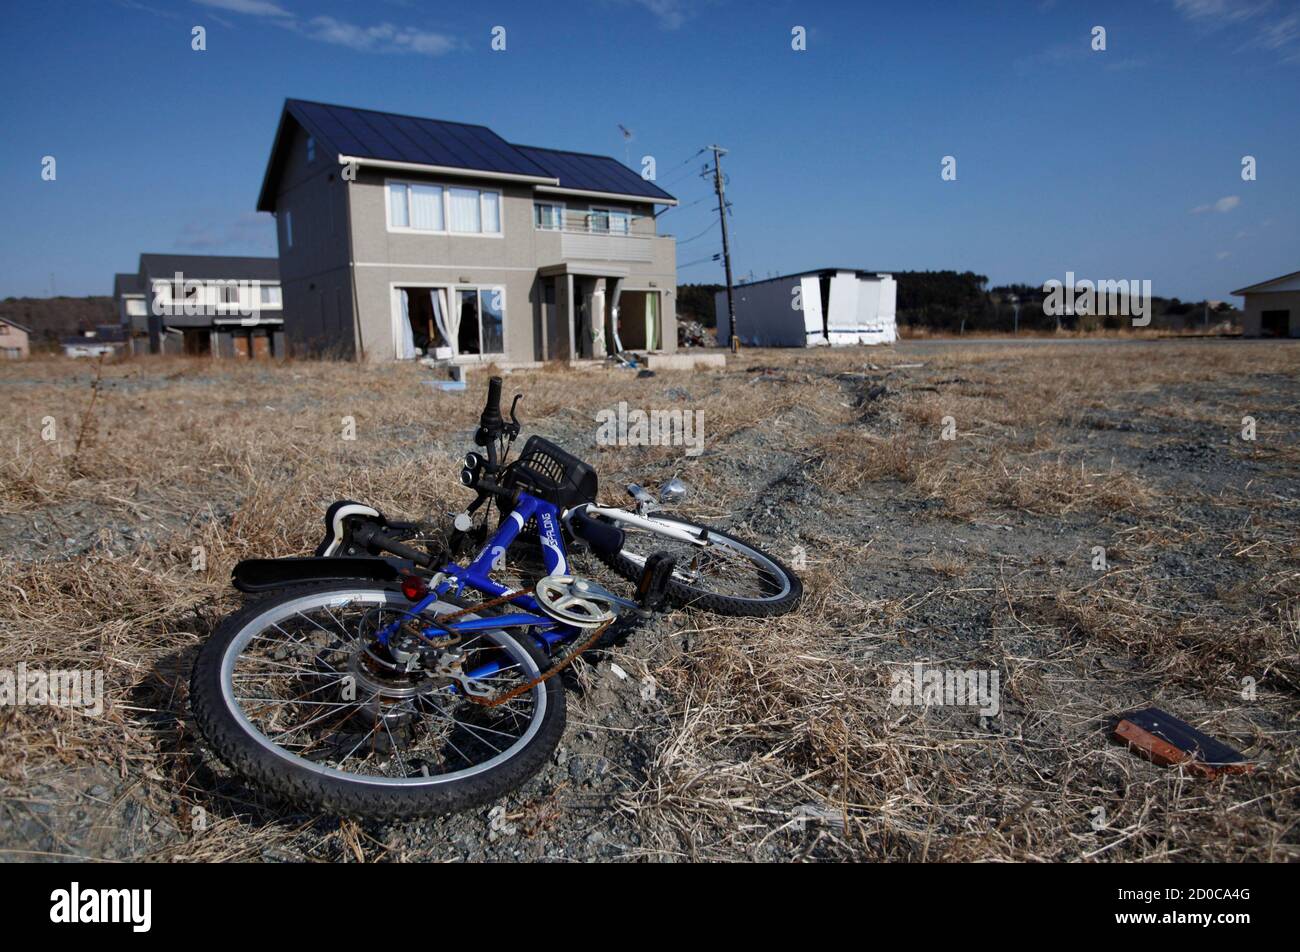 ATTENTION EDITORS - THIS IMAGE IS 2 OF 22 TO ACCOMPANY A PICTURE PACKAGE ON THE EVACUATED TOWNS INSIDE THE 20KM EXCLUSION ZONE AROUND THE FUKUSHIMA DAIICHI NUCLEAR POWER PLANT. SEARCH KEYWORD 'FUKUSHIMA' TO SEE ALL IMAGES PXP900-921.   An abandoned child's bicycle and houses destroyed by the tsunami are seen in Tomioka town, inside the exclusion zone of a 20km radius around the crippled Fukushima Daiichi nuclear power plant, Fukushima prefecture, January 15, 2012. The Fukushima Daiichi nuclear power plant was hit on March 11, 2011 by a tsunami that exceeded 15 metres in some areas. The tsunami Stock Photo